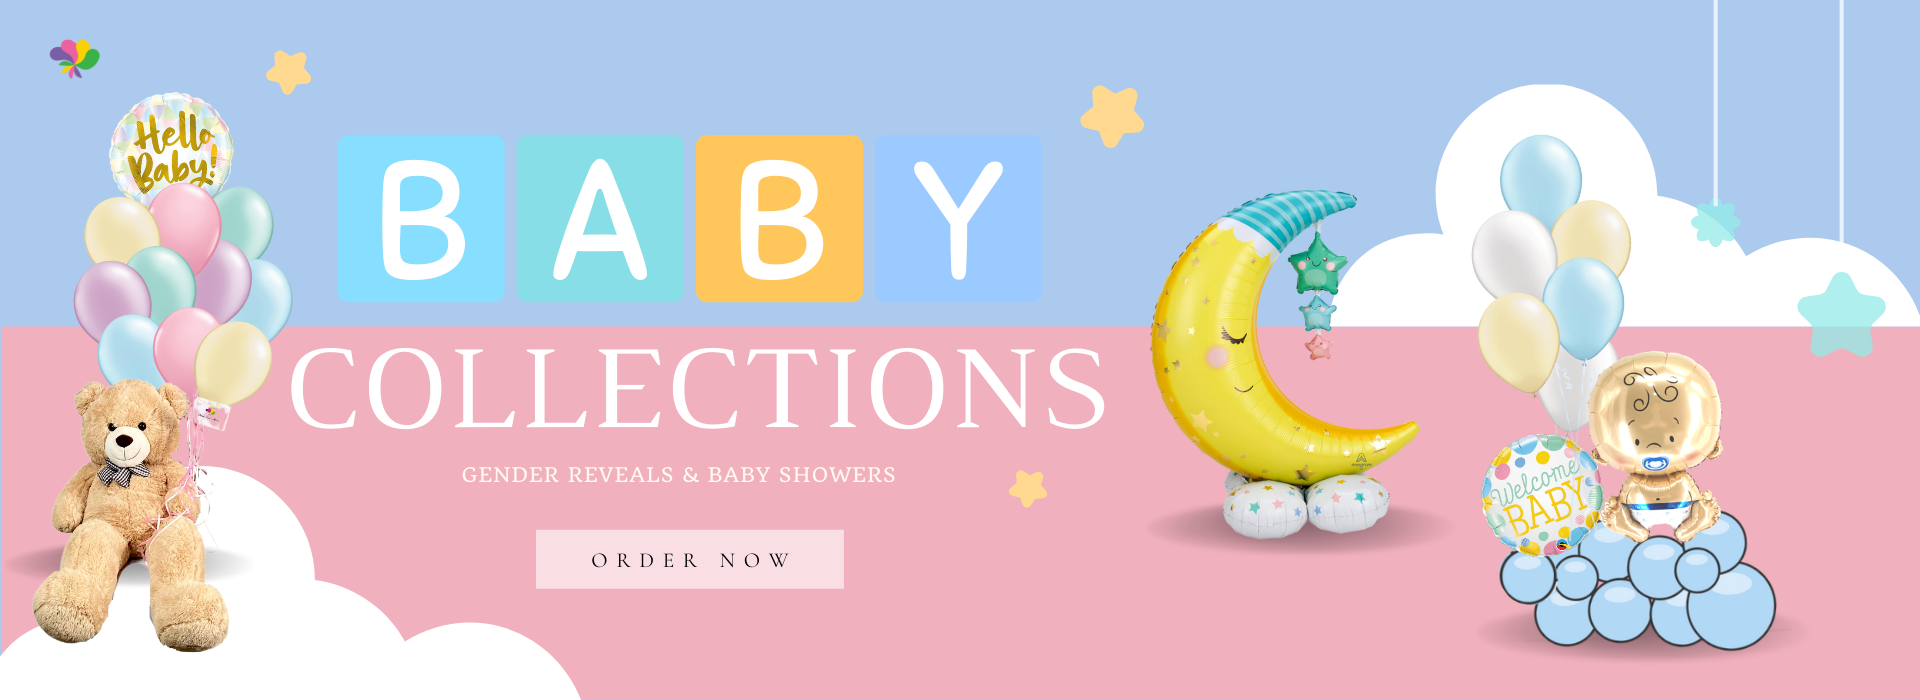 Baby collections